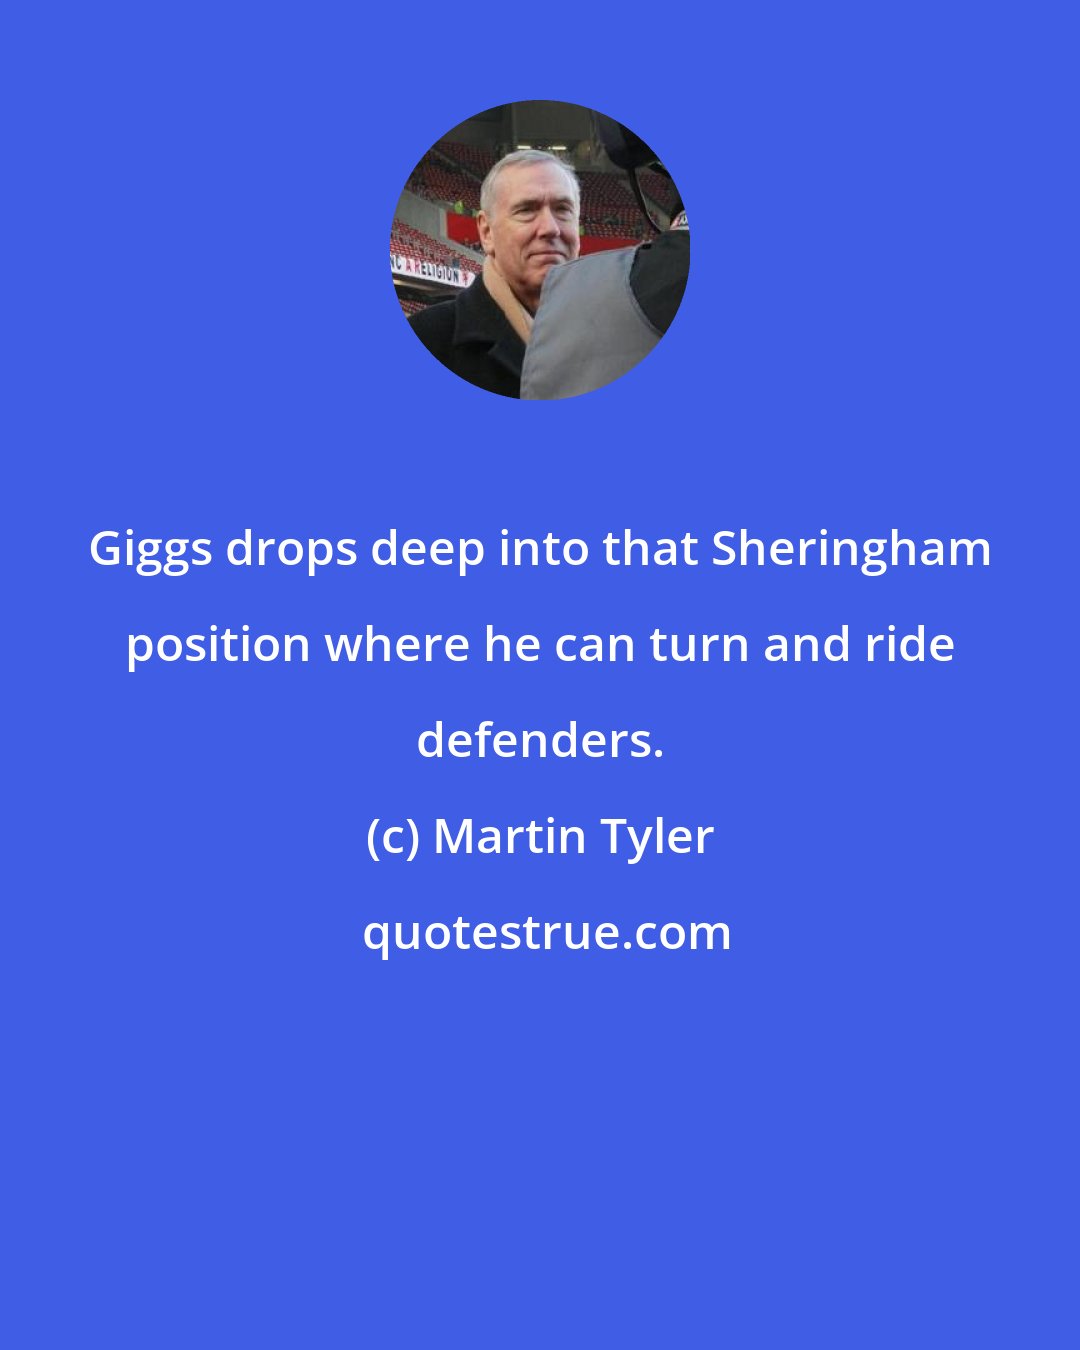 Martin Tyler: Giggs drops deep into that Sheringham position where he can turn and ride defenders.